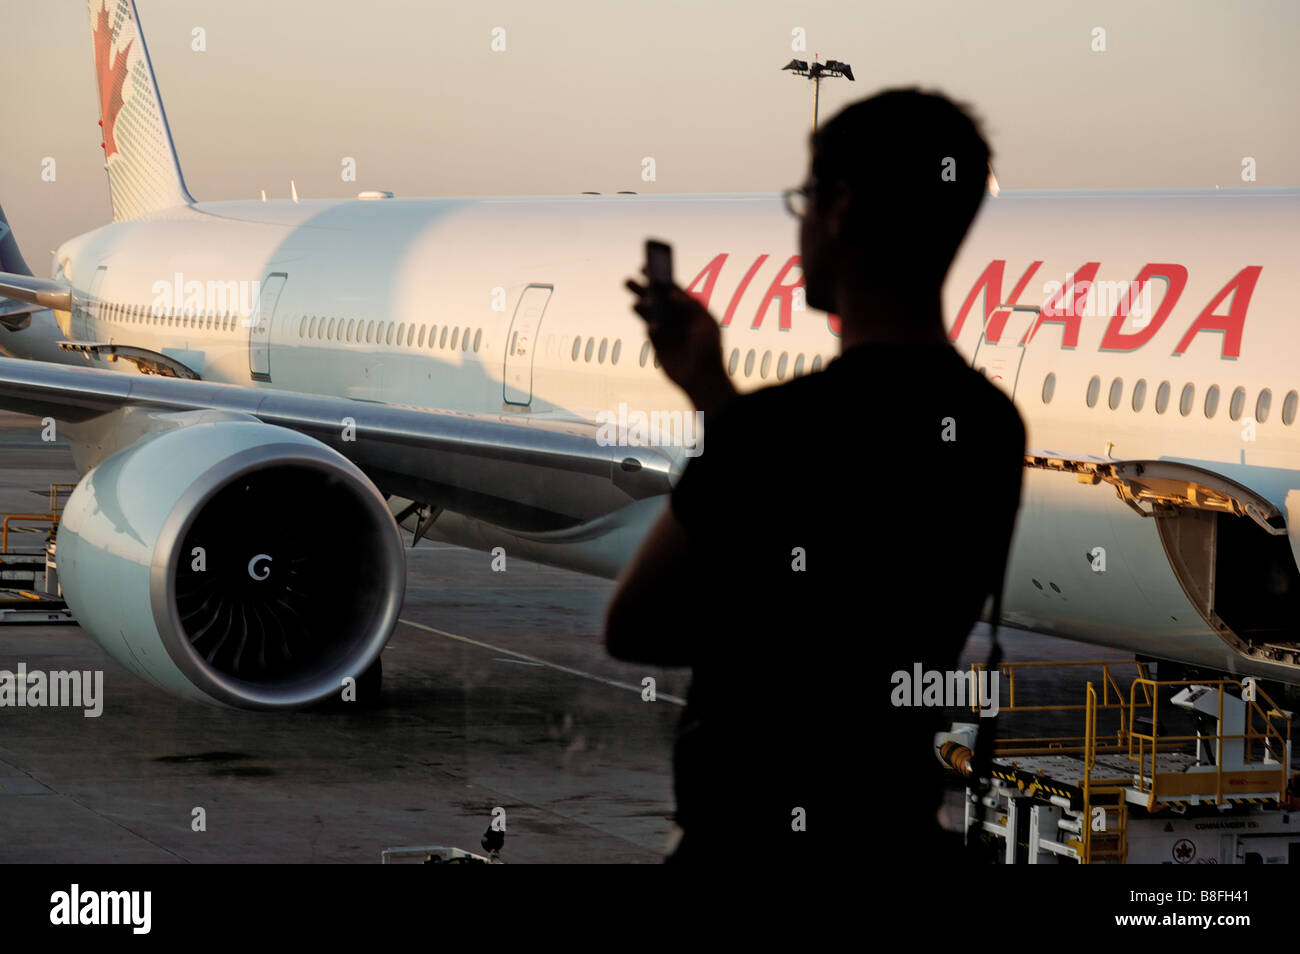 A man on a mobile phone in silhouette in an airport departure lounge window with a plane behind Stock Photo